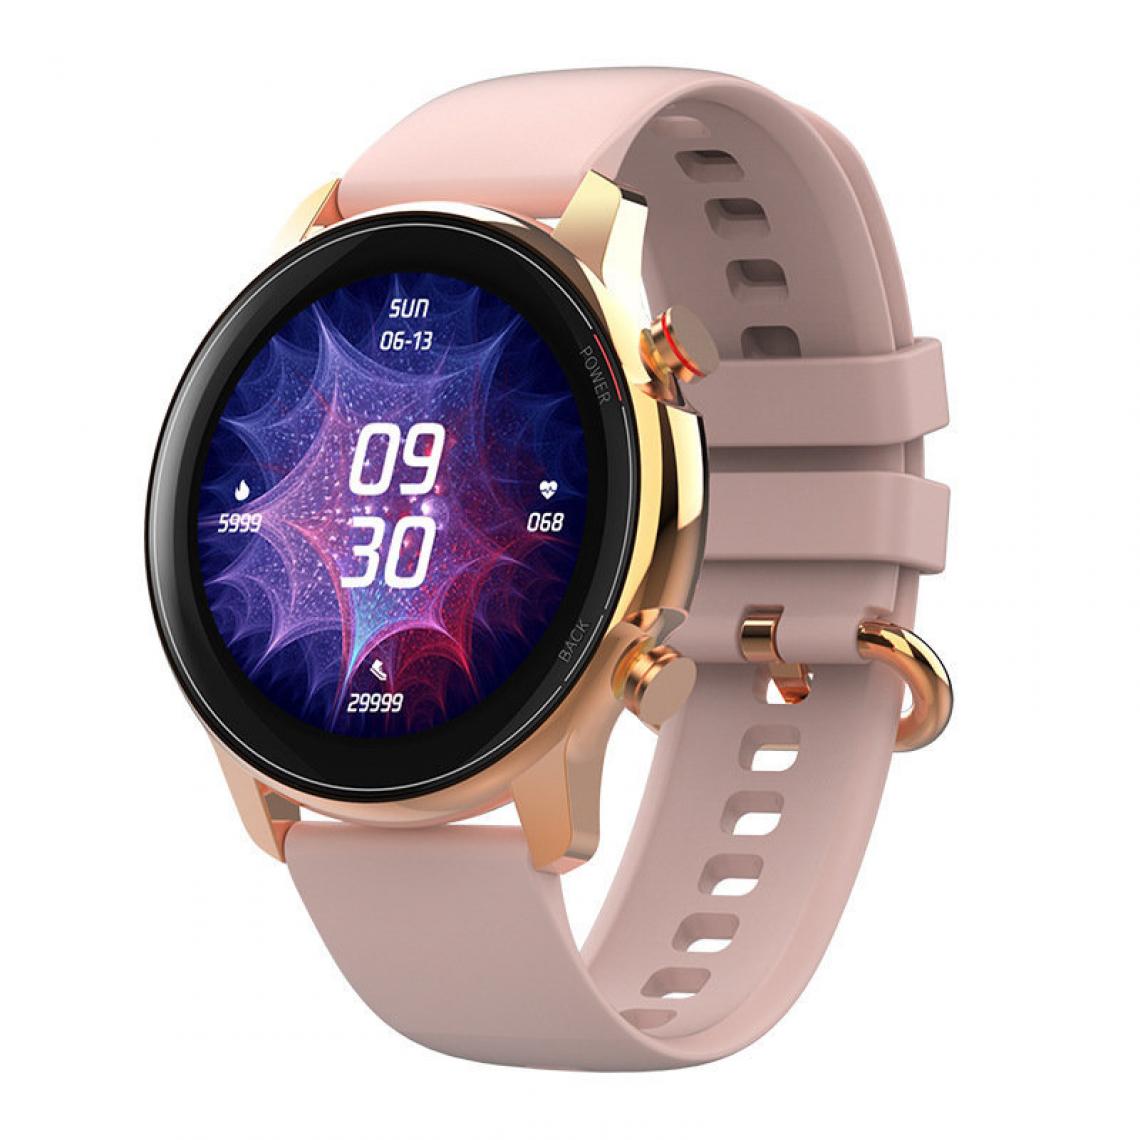 Chronotech Montres - Men Connected Watch Smart Bracelet: IP68 Waterproof Smartwatch 1.32 Inch Smartwatch Sport Fitness Tracker with Blood Pressure Monitor Pedometer Heart Rate Sleep Monitor for Android iOS(Pink) - Montre connectée